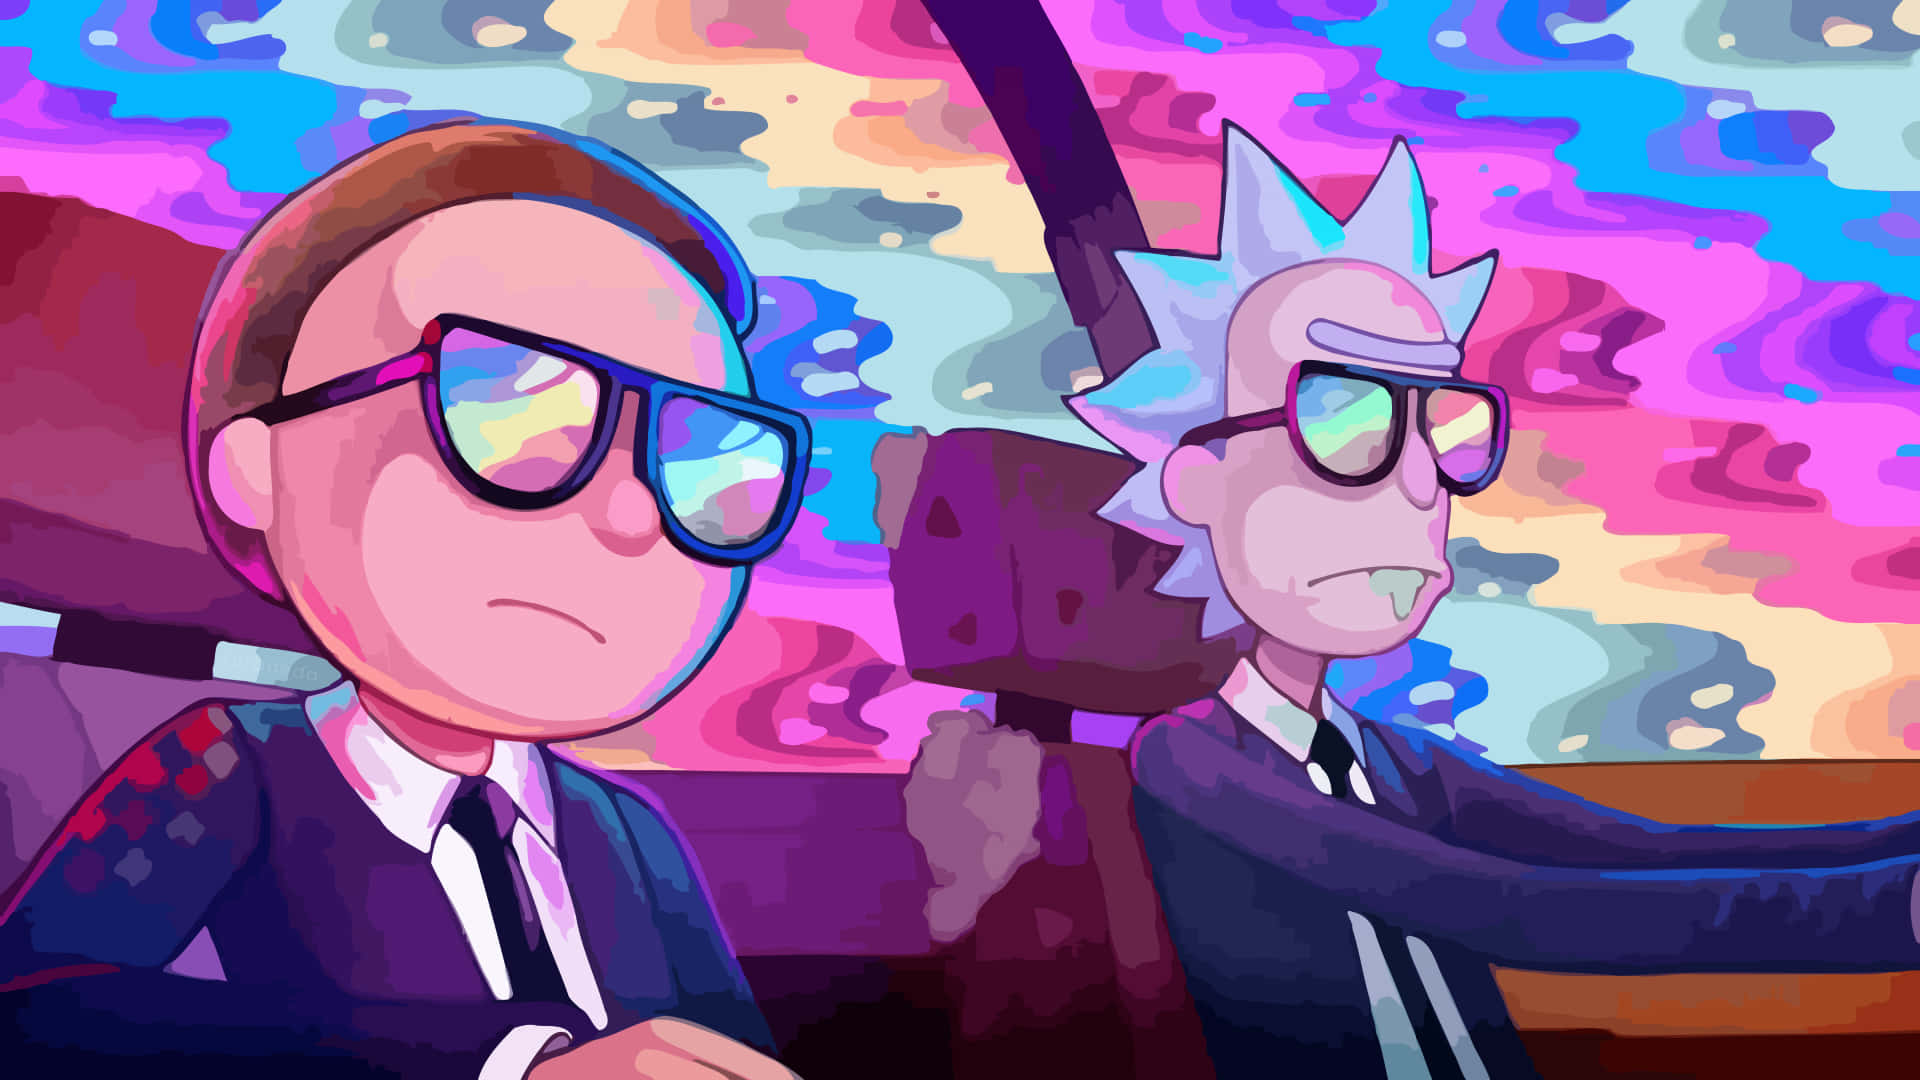 Enjoy endless entertainment from Rick and Morty with the latest laptop Wallpaper